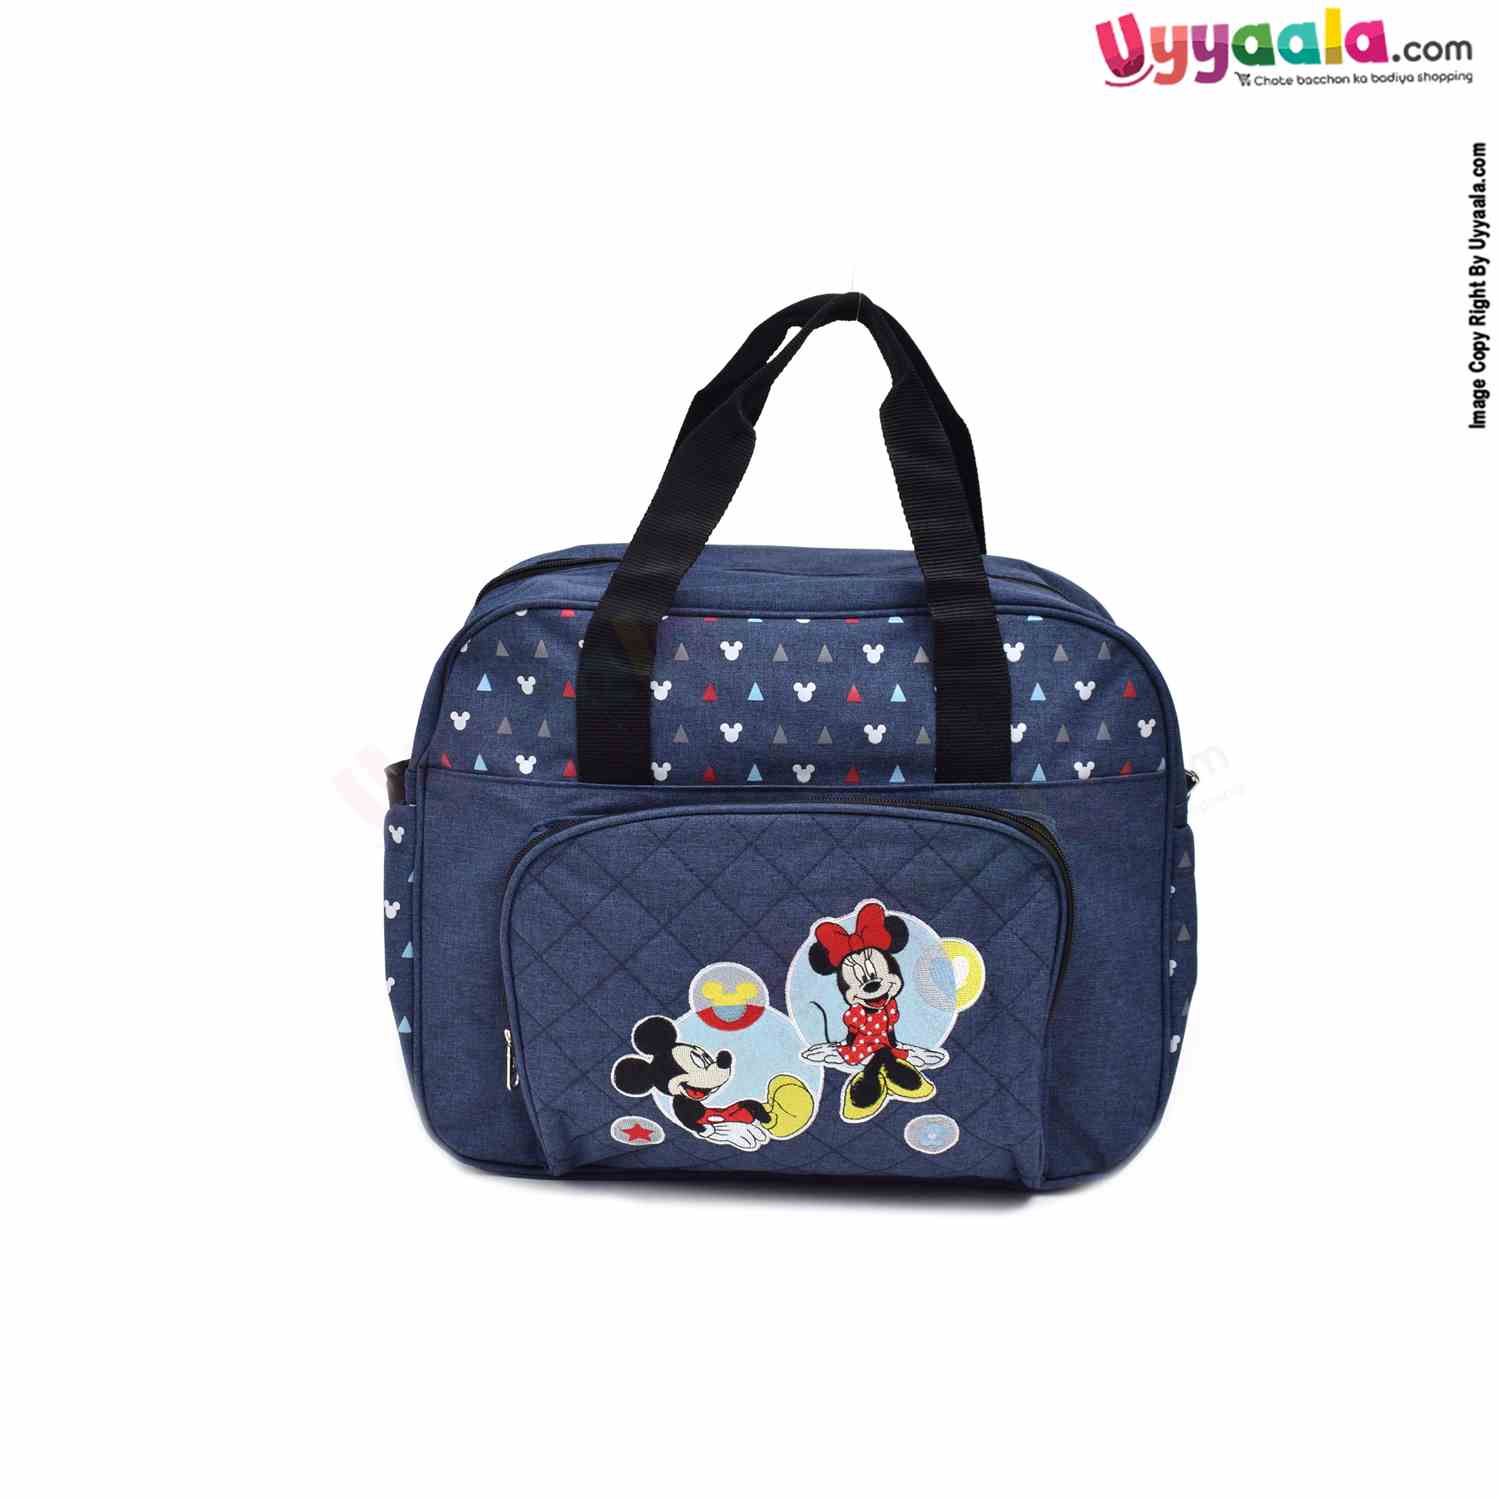 Premium Quality Multipurpose Mother Bag(Diaper Bag) with side Bottle Holder & Changing Mat, Mickey & Minnie Mouse Embroidery, Size(41*34cm) - Navy Blue